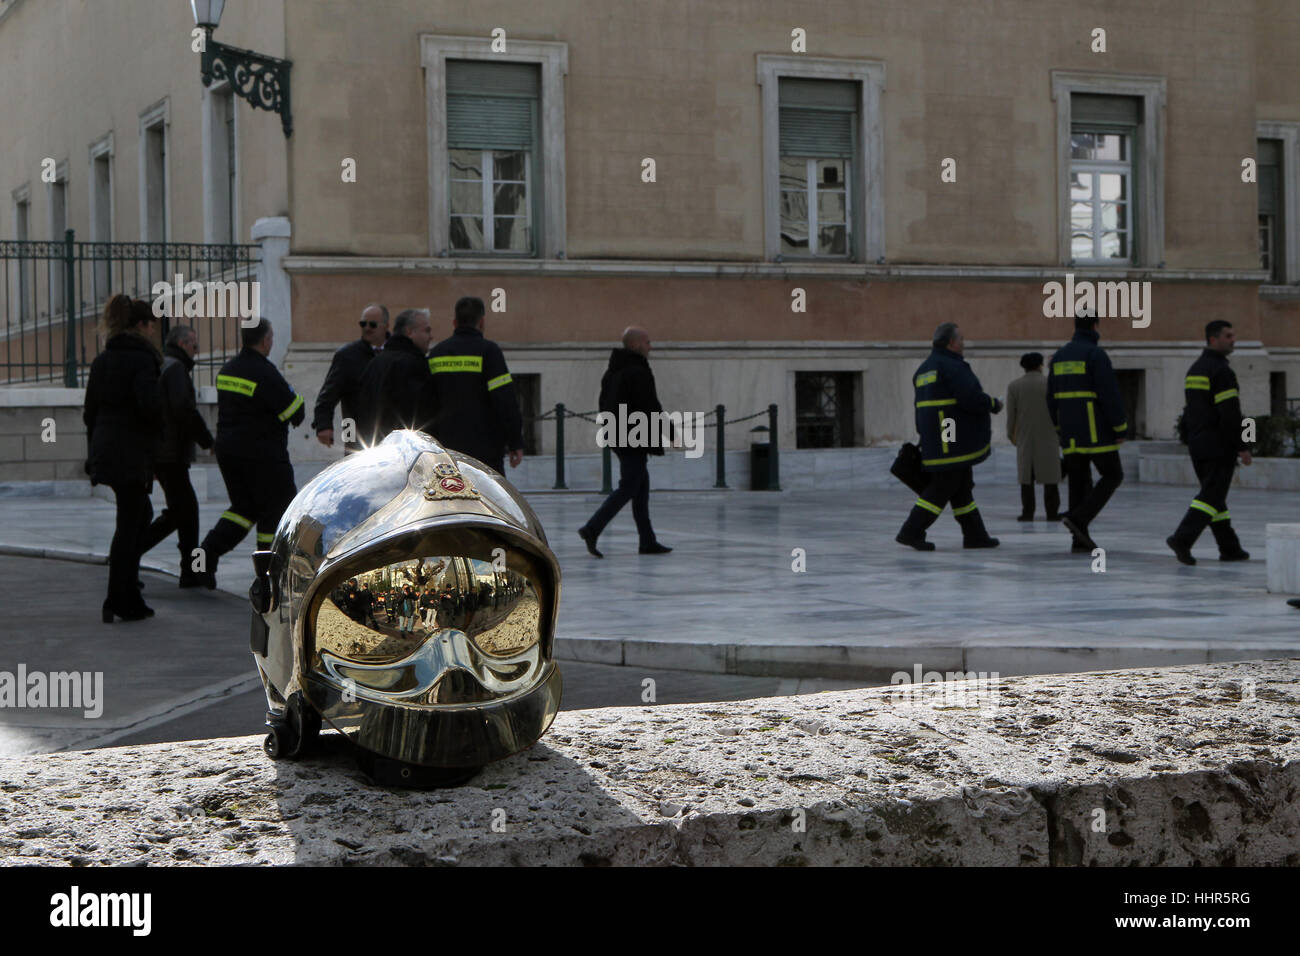 Athens. 20th Jan, 2017. Greek firemen hold a demonstration in central Athens on Jan. 20, 2017. The unions representing firemen across Greece protested against spending cuts and structural changes in the operation of the Fire Service. Credit: Marios Lolos/Xinhua/Alamy Live News Stock Photo